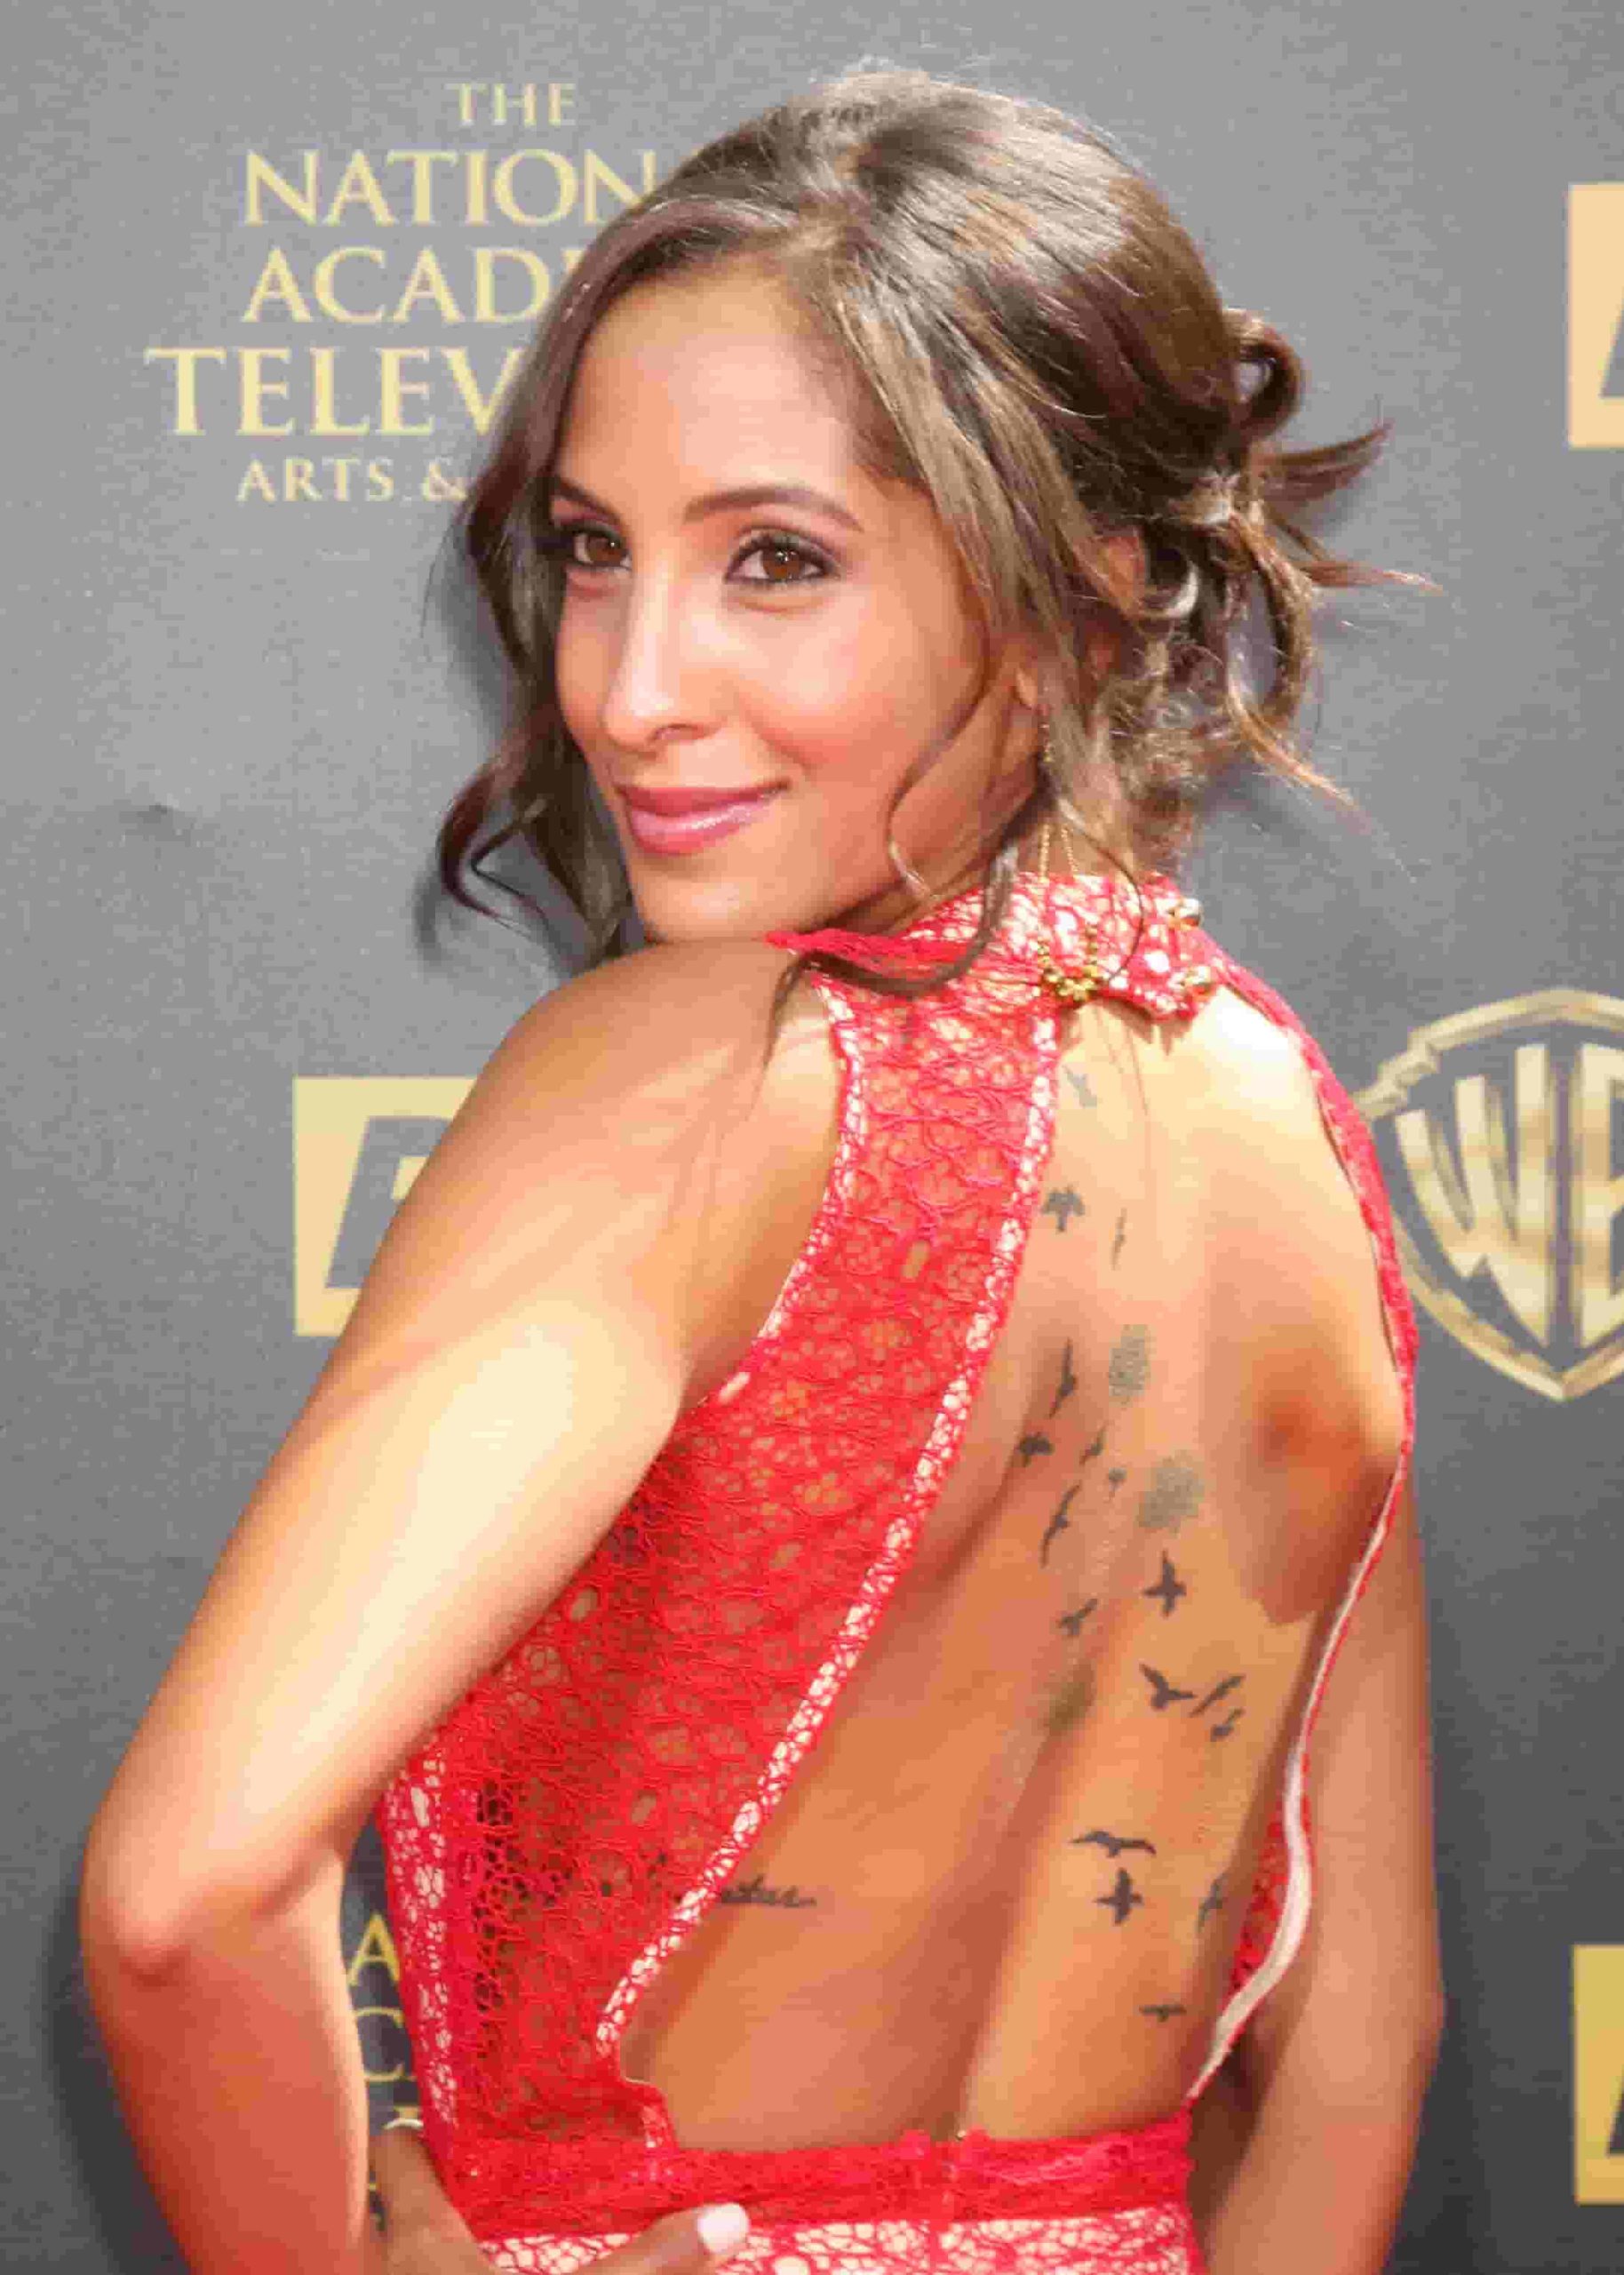 Image of Christel Khalil with back tattoos